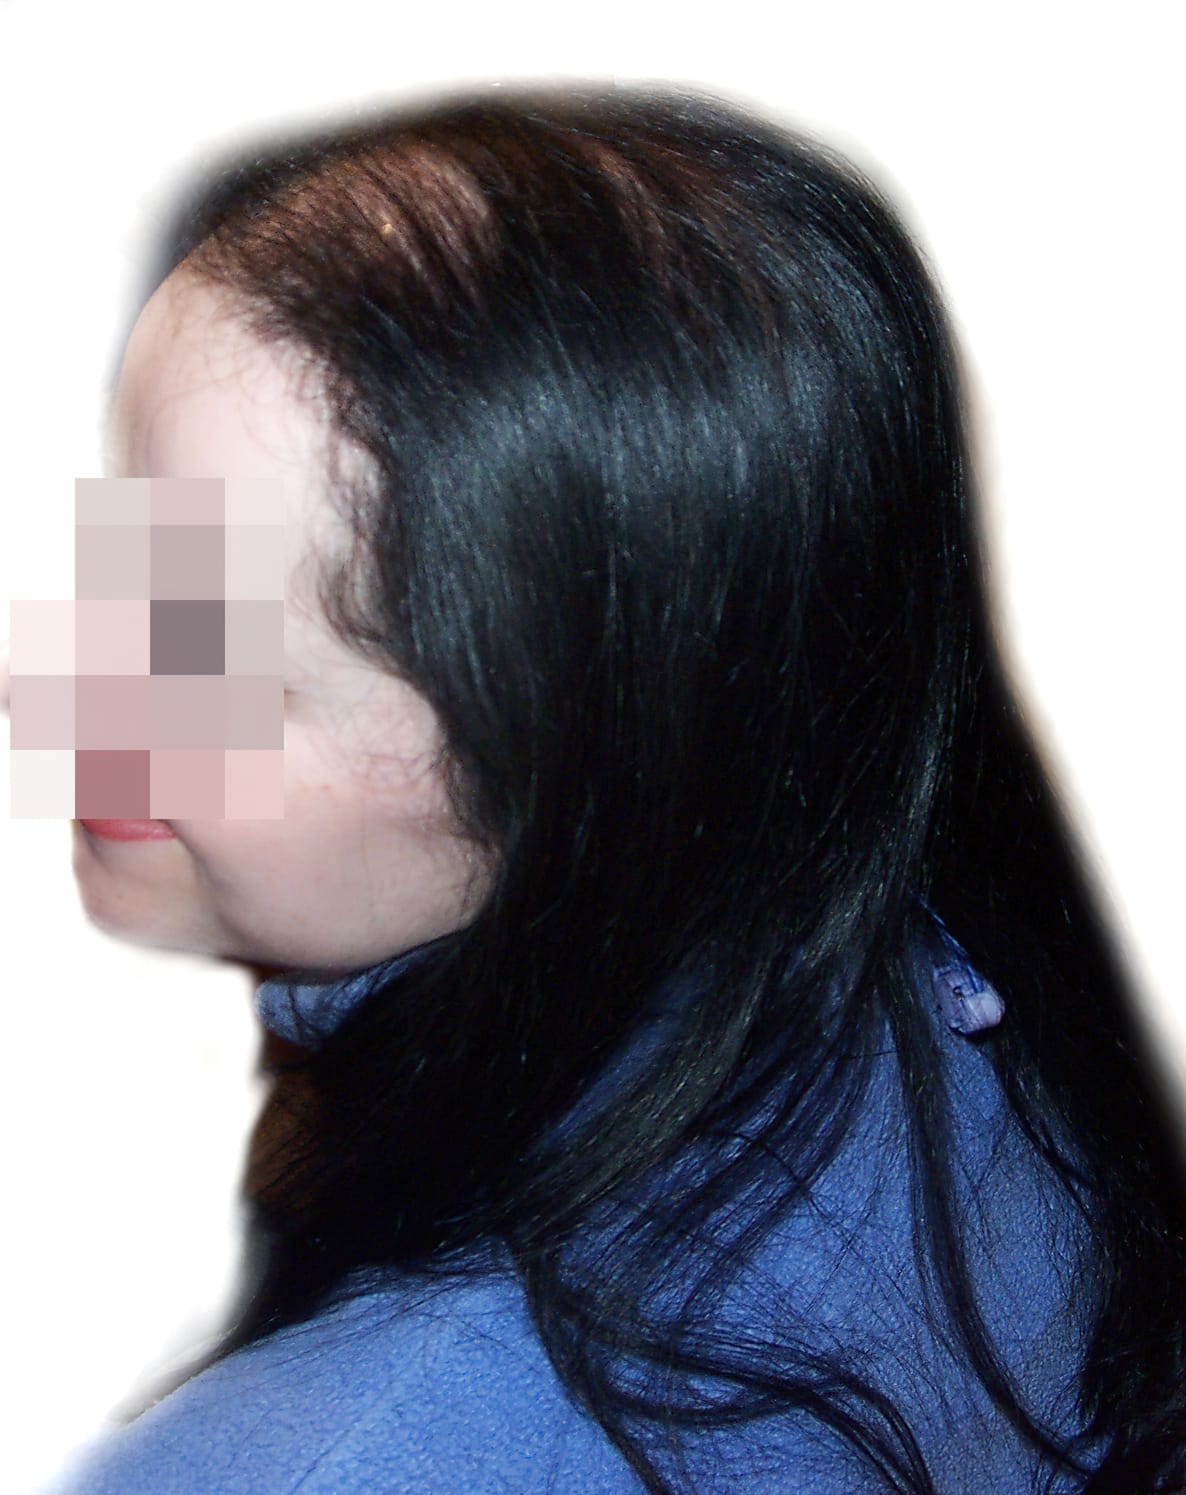 Before Picture - Androgenetic Alopecia